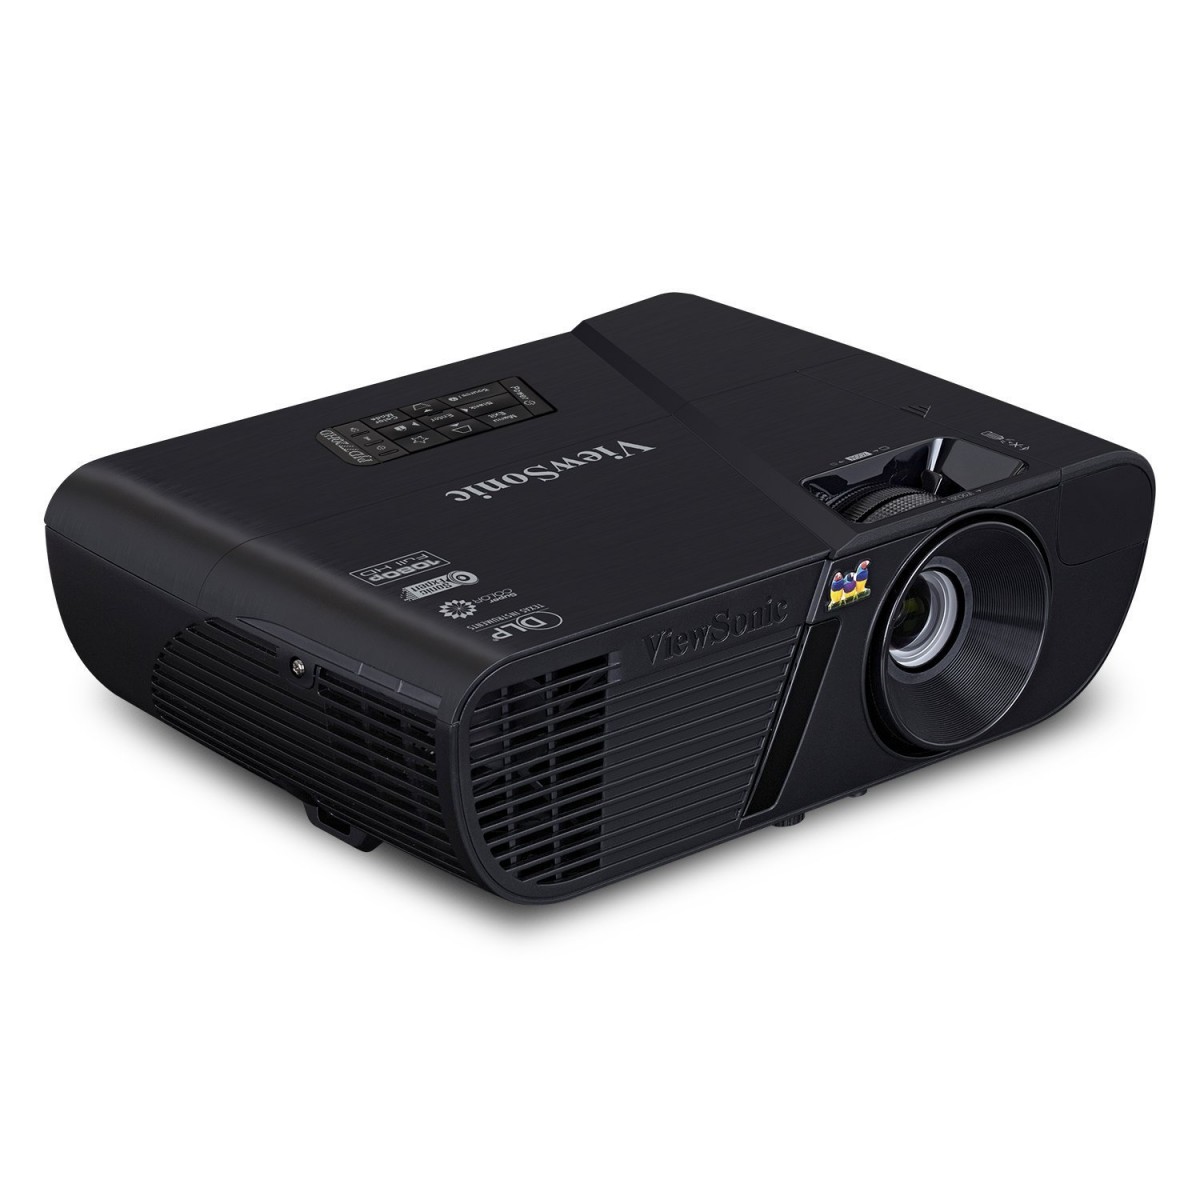 viewsonic pjd7720hd projector review